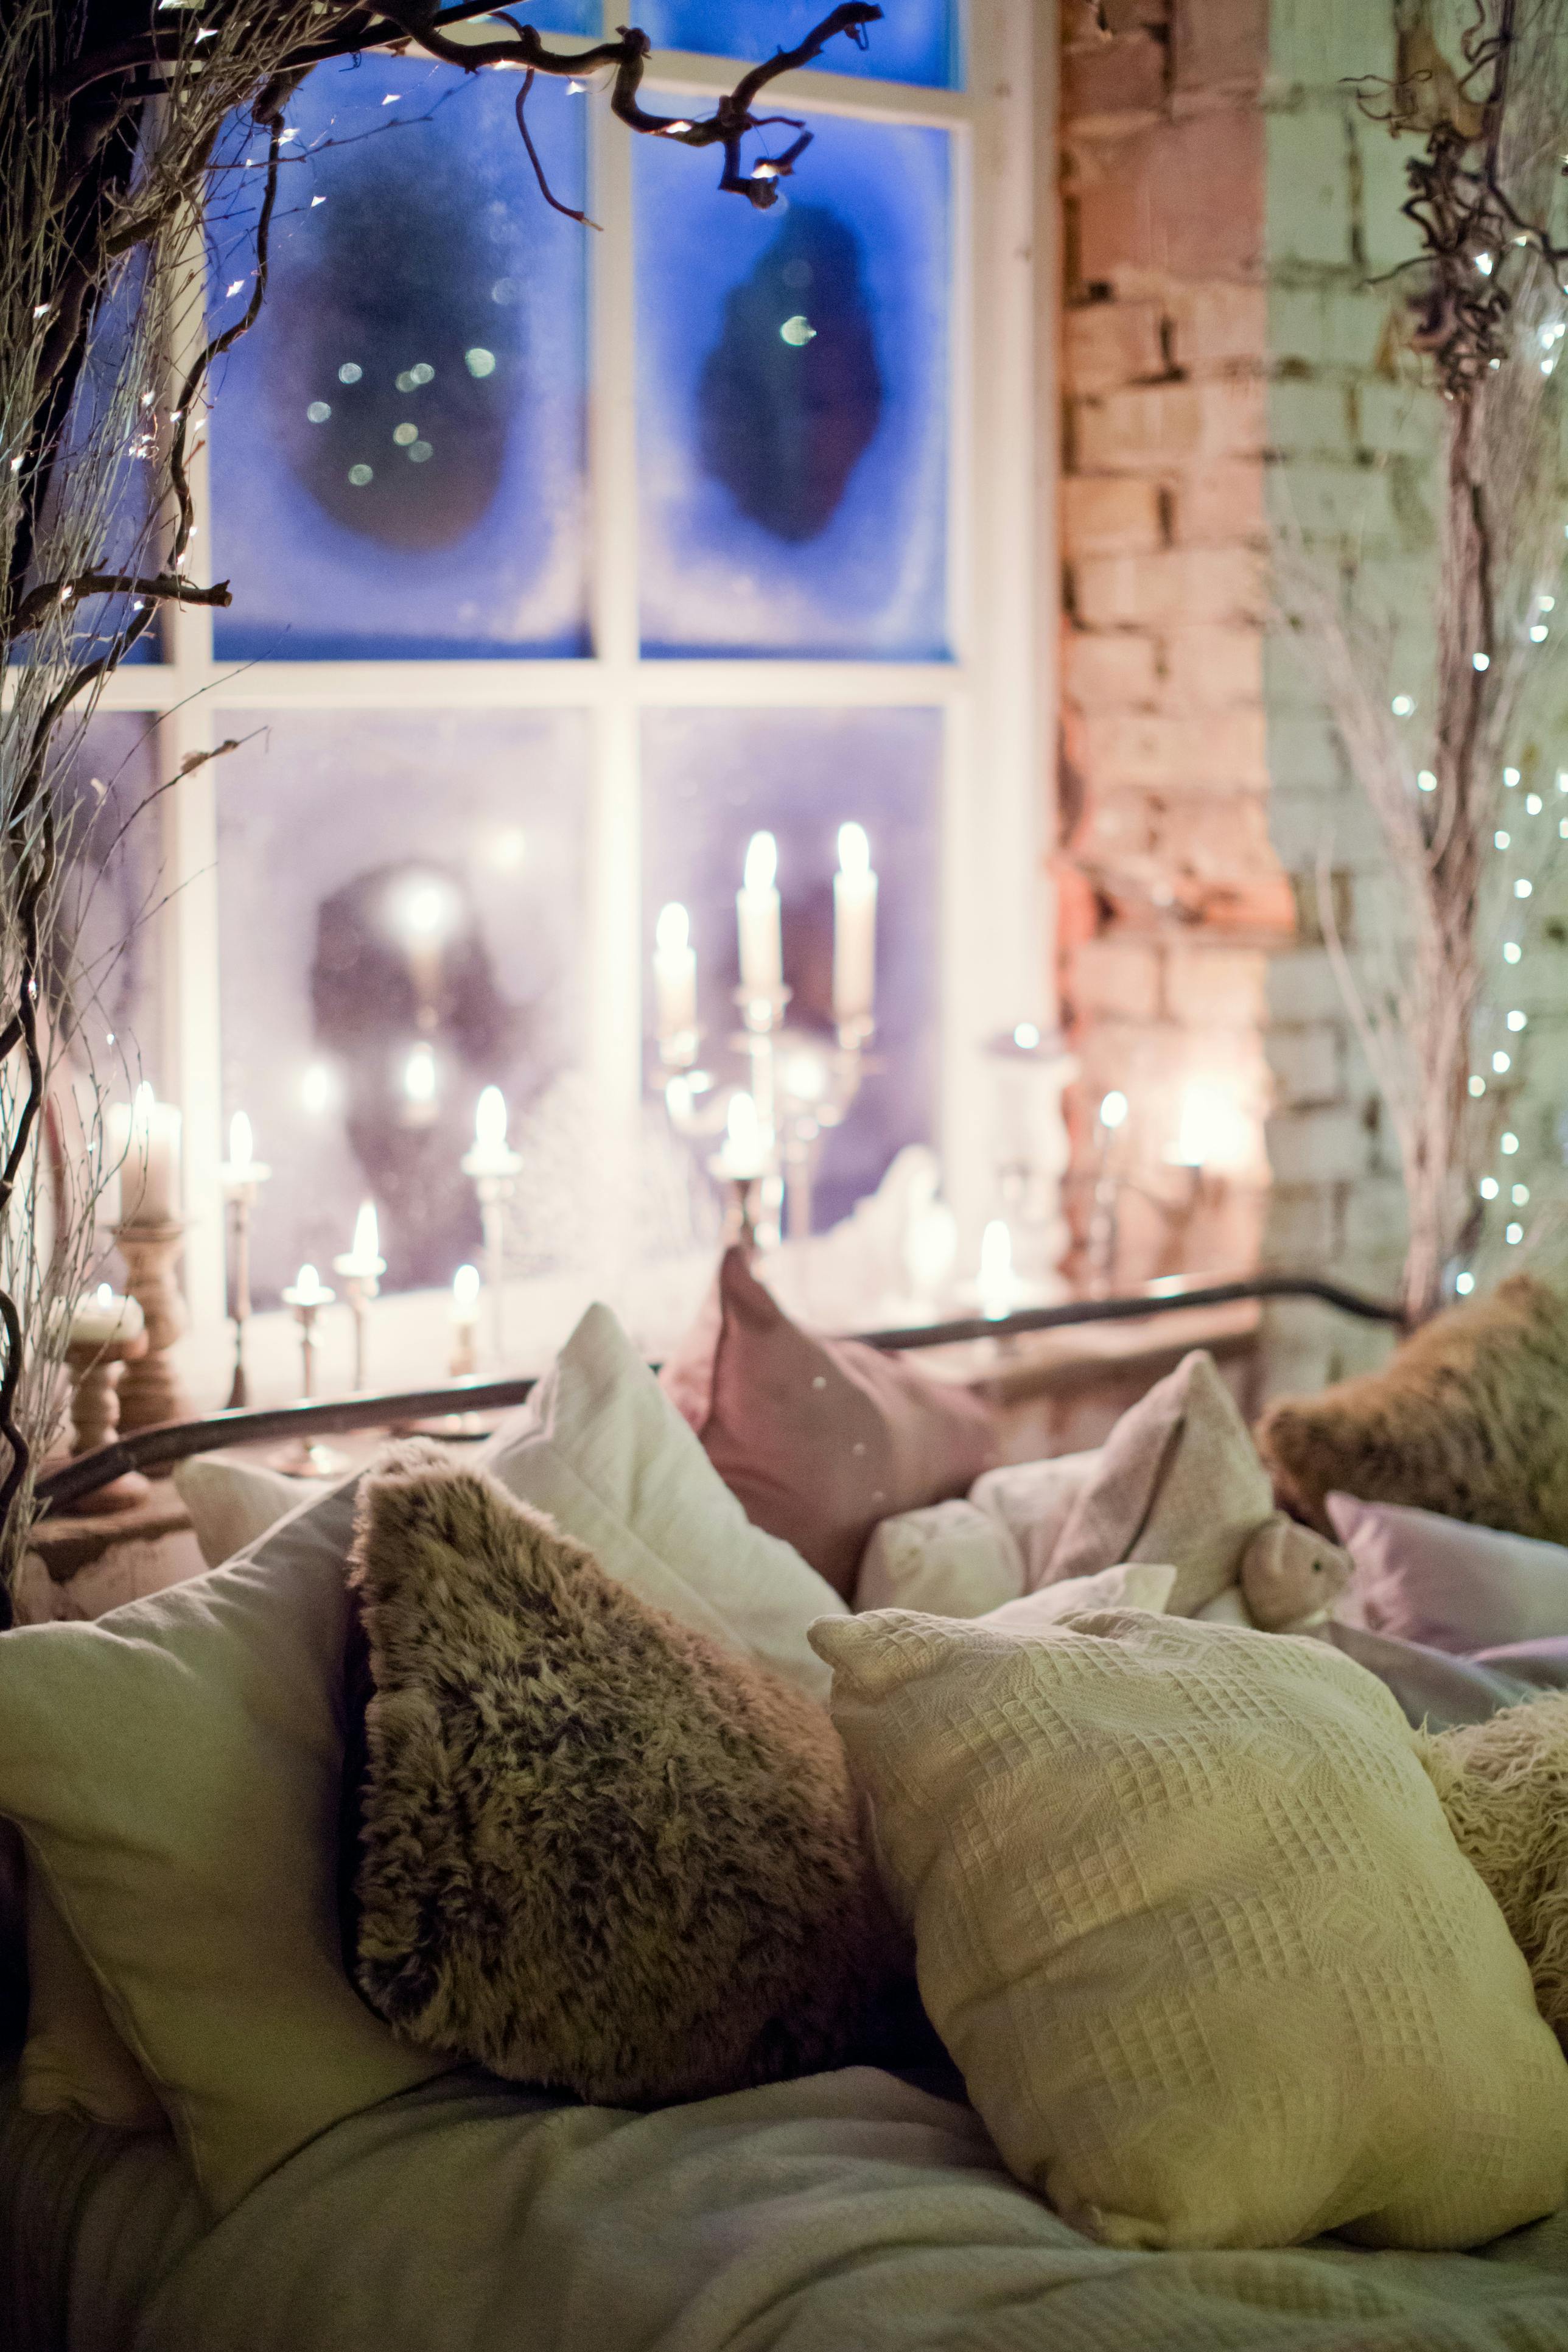 3 Tips To Managing Your Holiday Sleep Routine - From a Sleep Expert